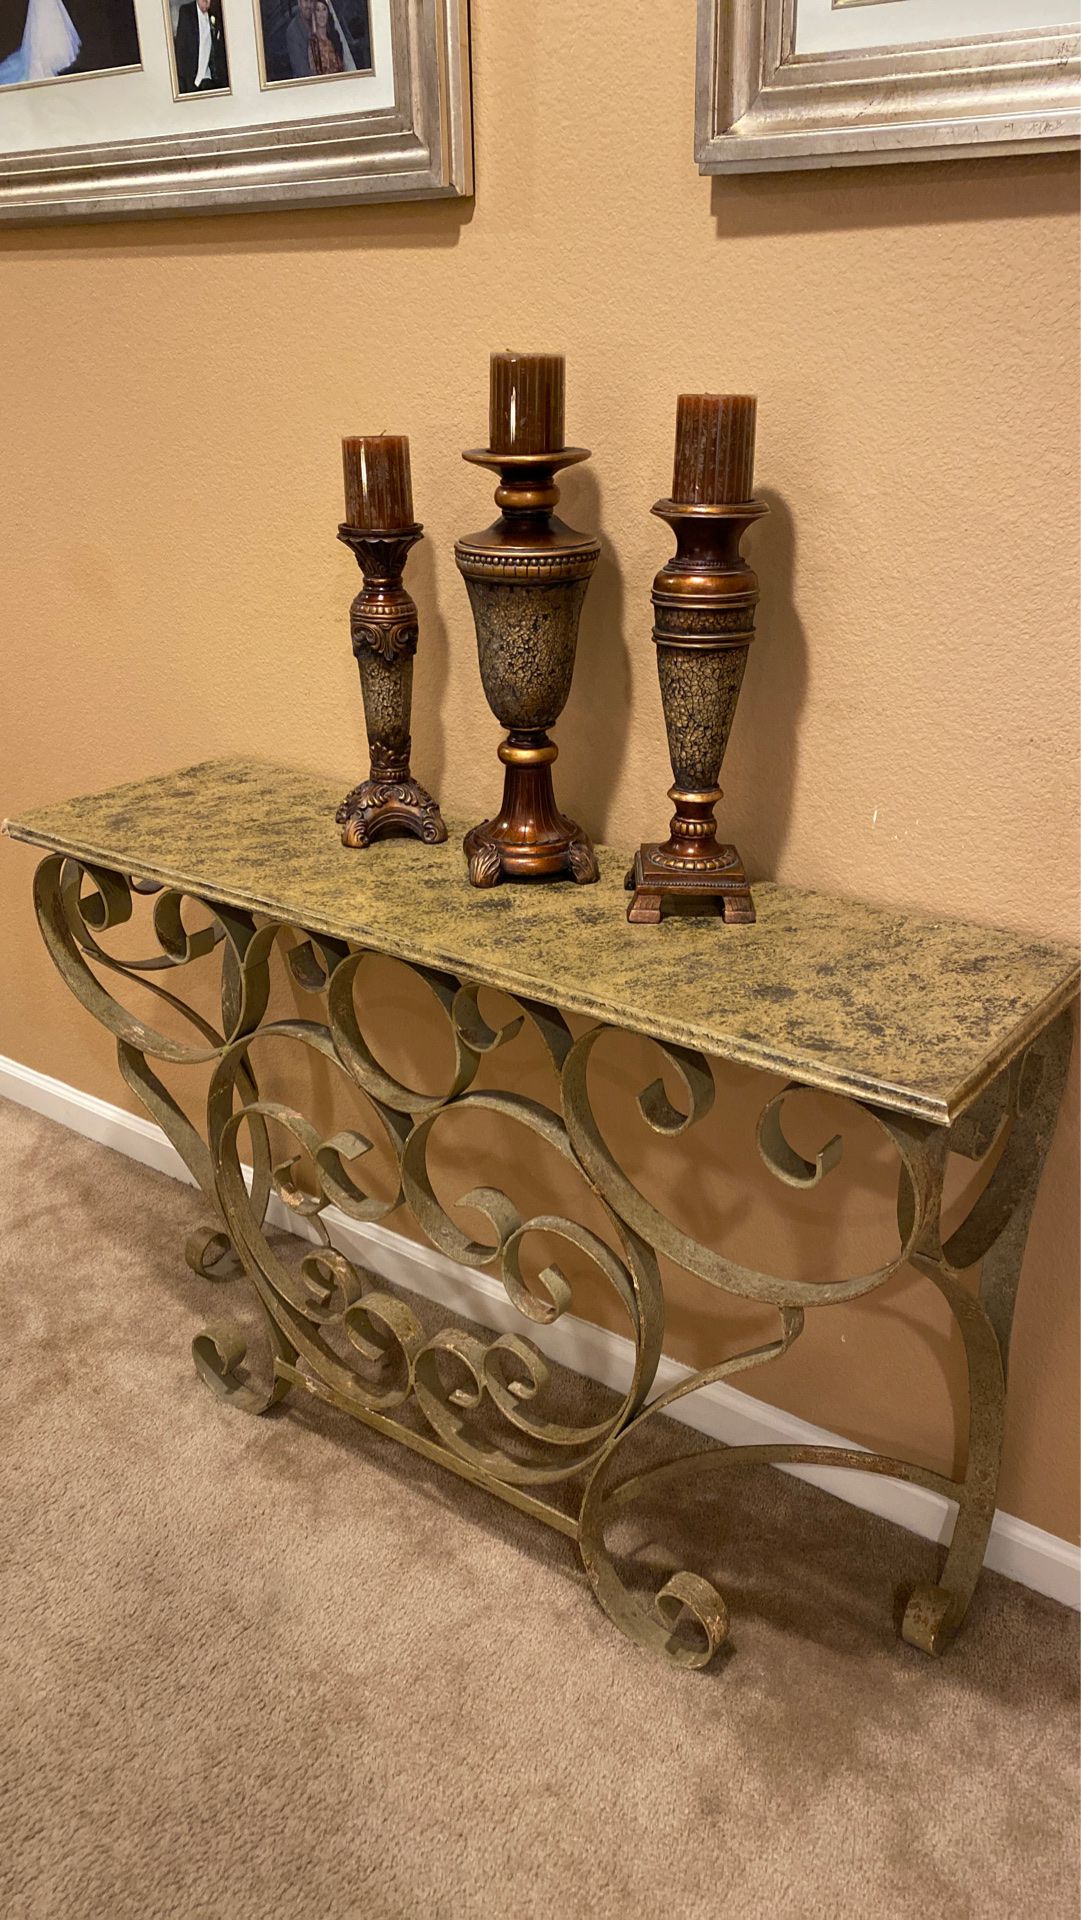 Sofa table with candles